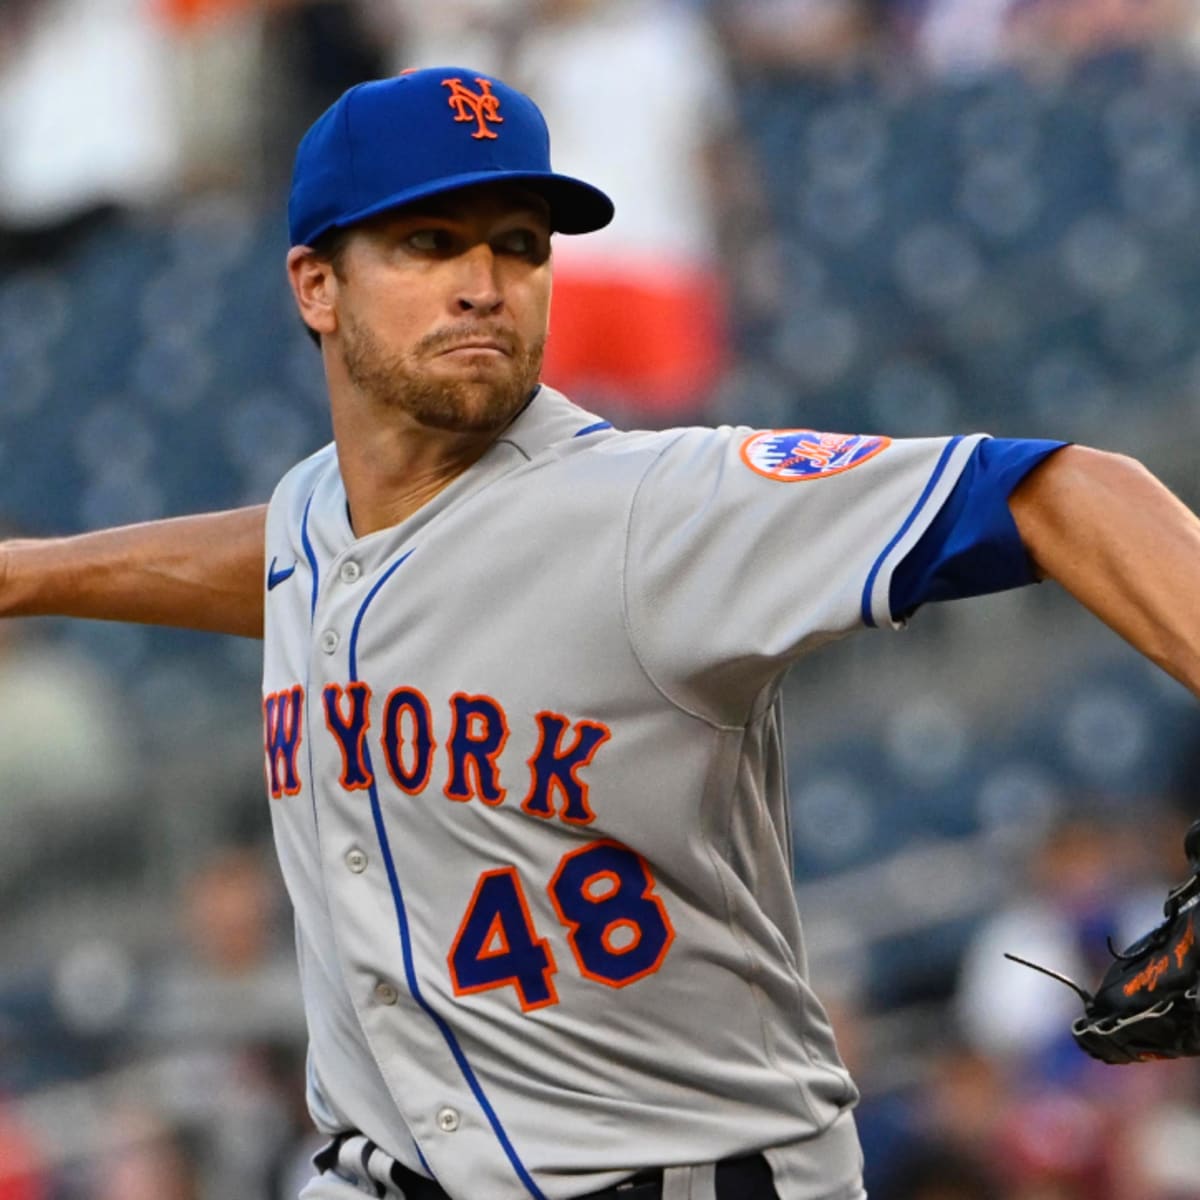 DeGrom injury news hangs over Mets 6-2 loss to Reds